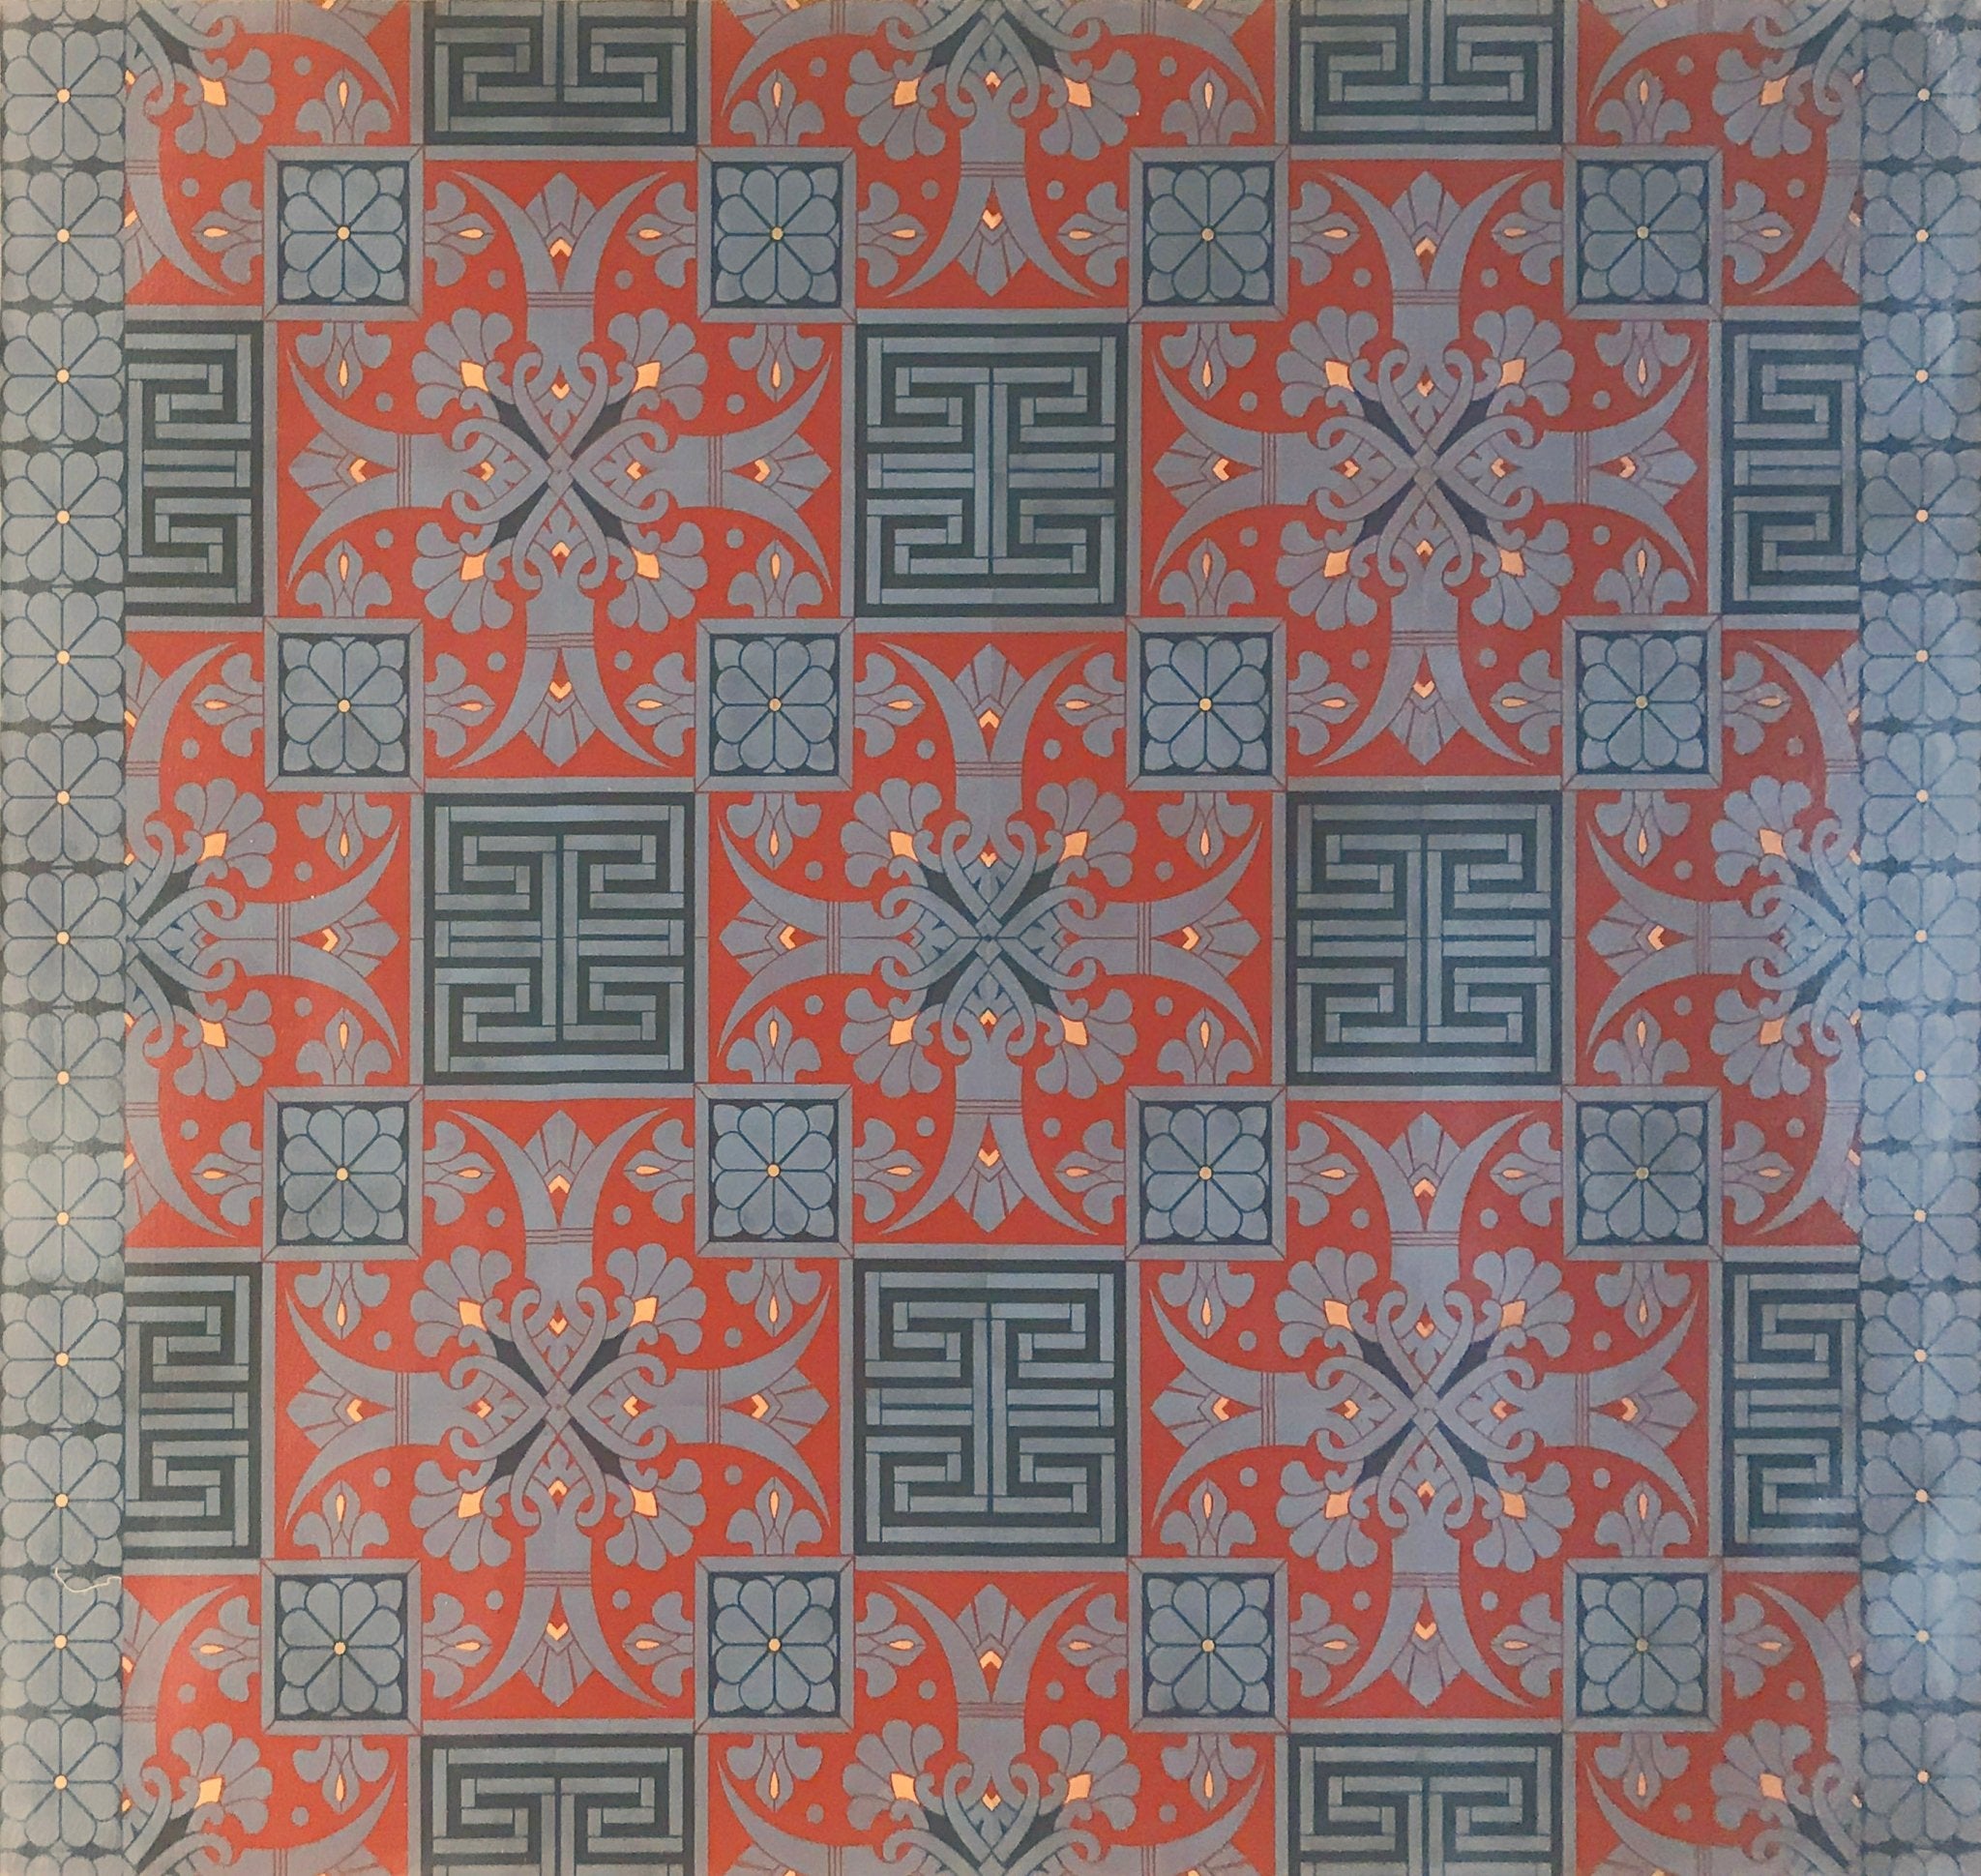 Full image of this floorcloth with an Greek Key design based on a Christopher Dresser pattern.